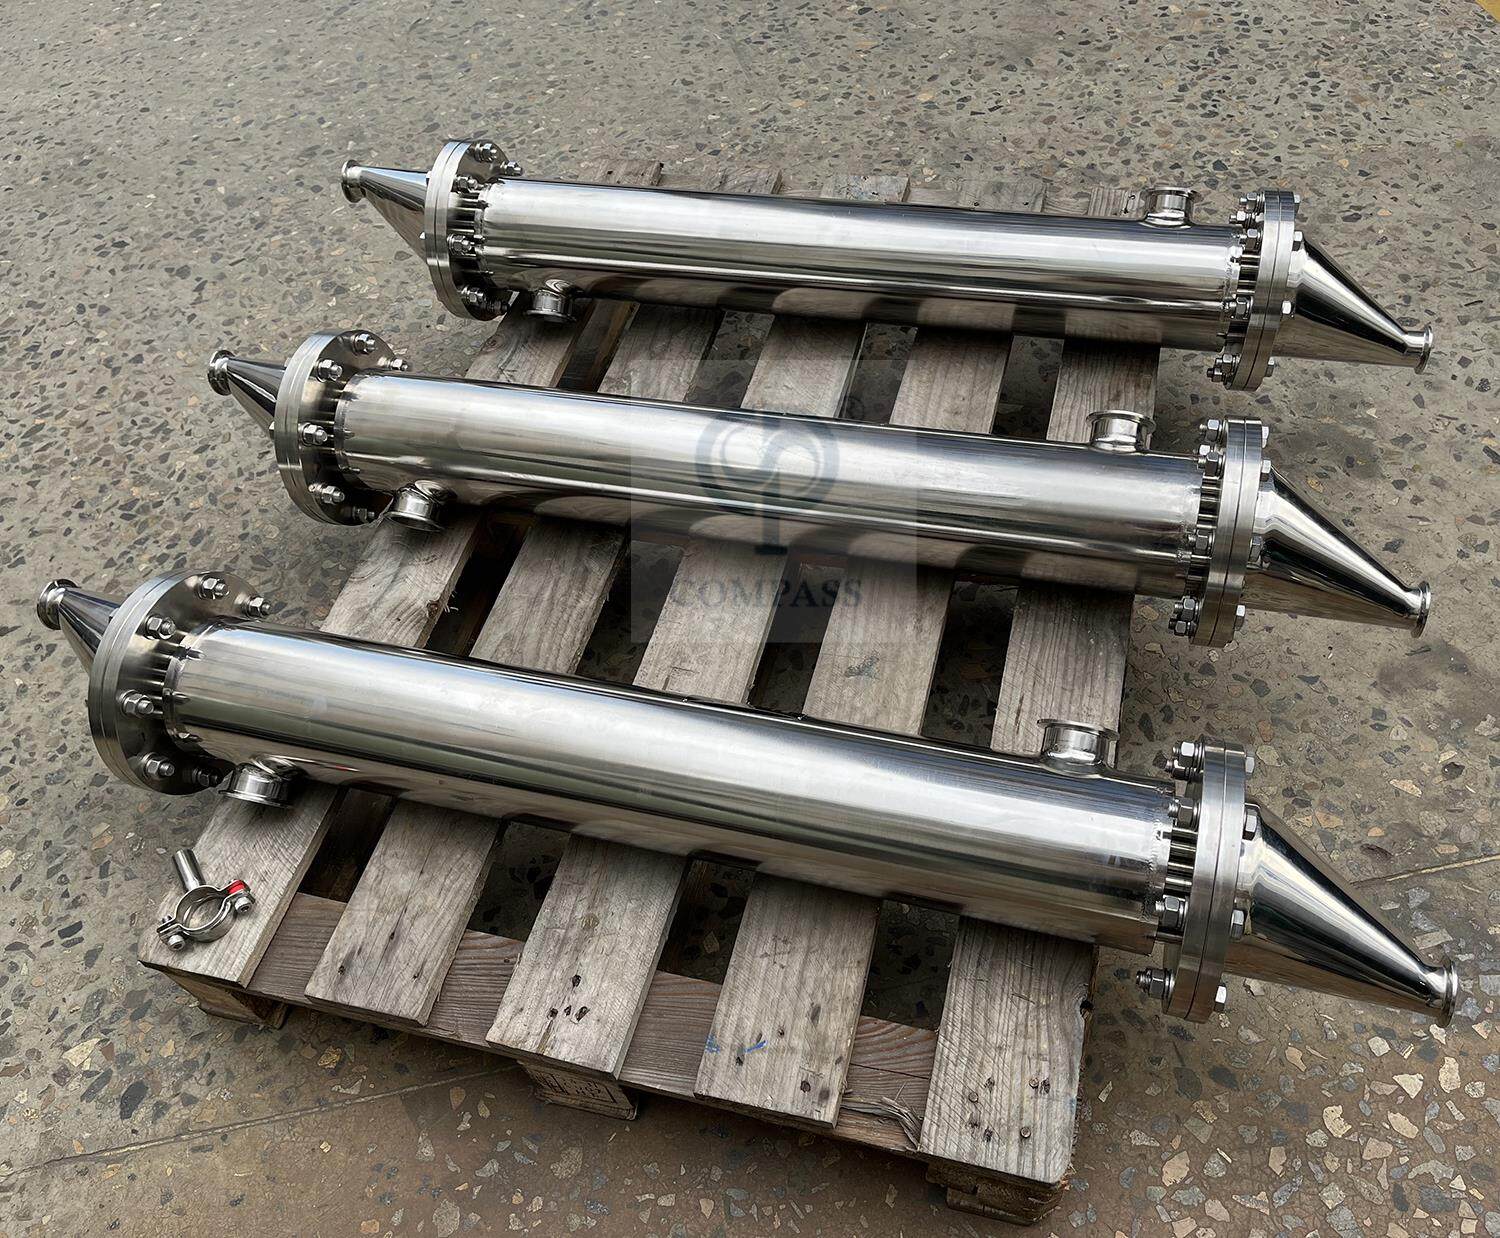 stainless steel tube heat exchanger, stainless tube heat exchanger, steel tube heat exchanger, stainless heat exchanger tube